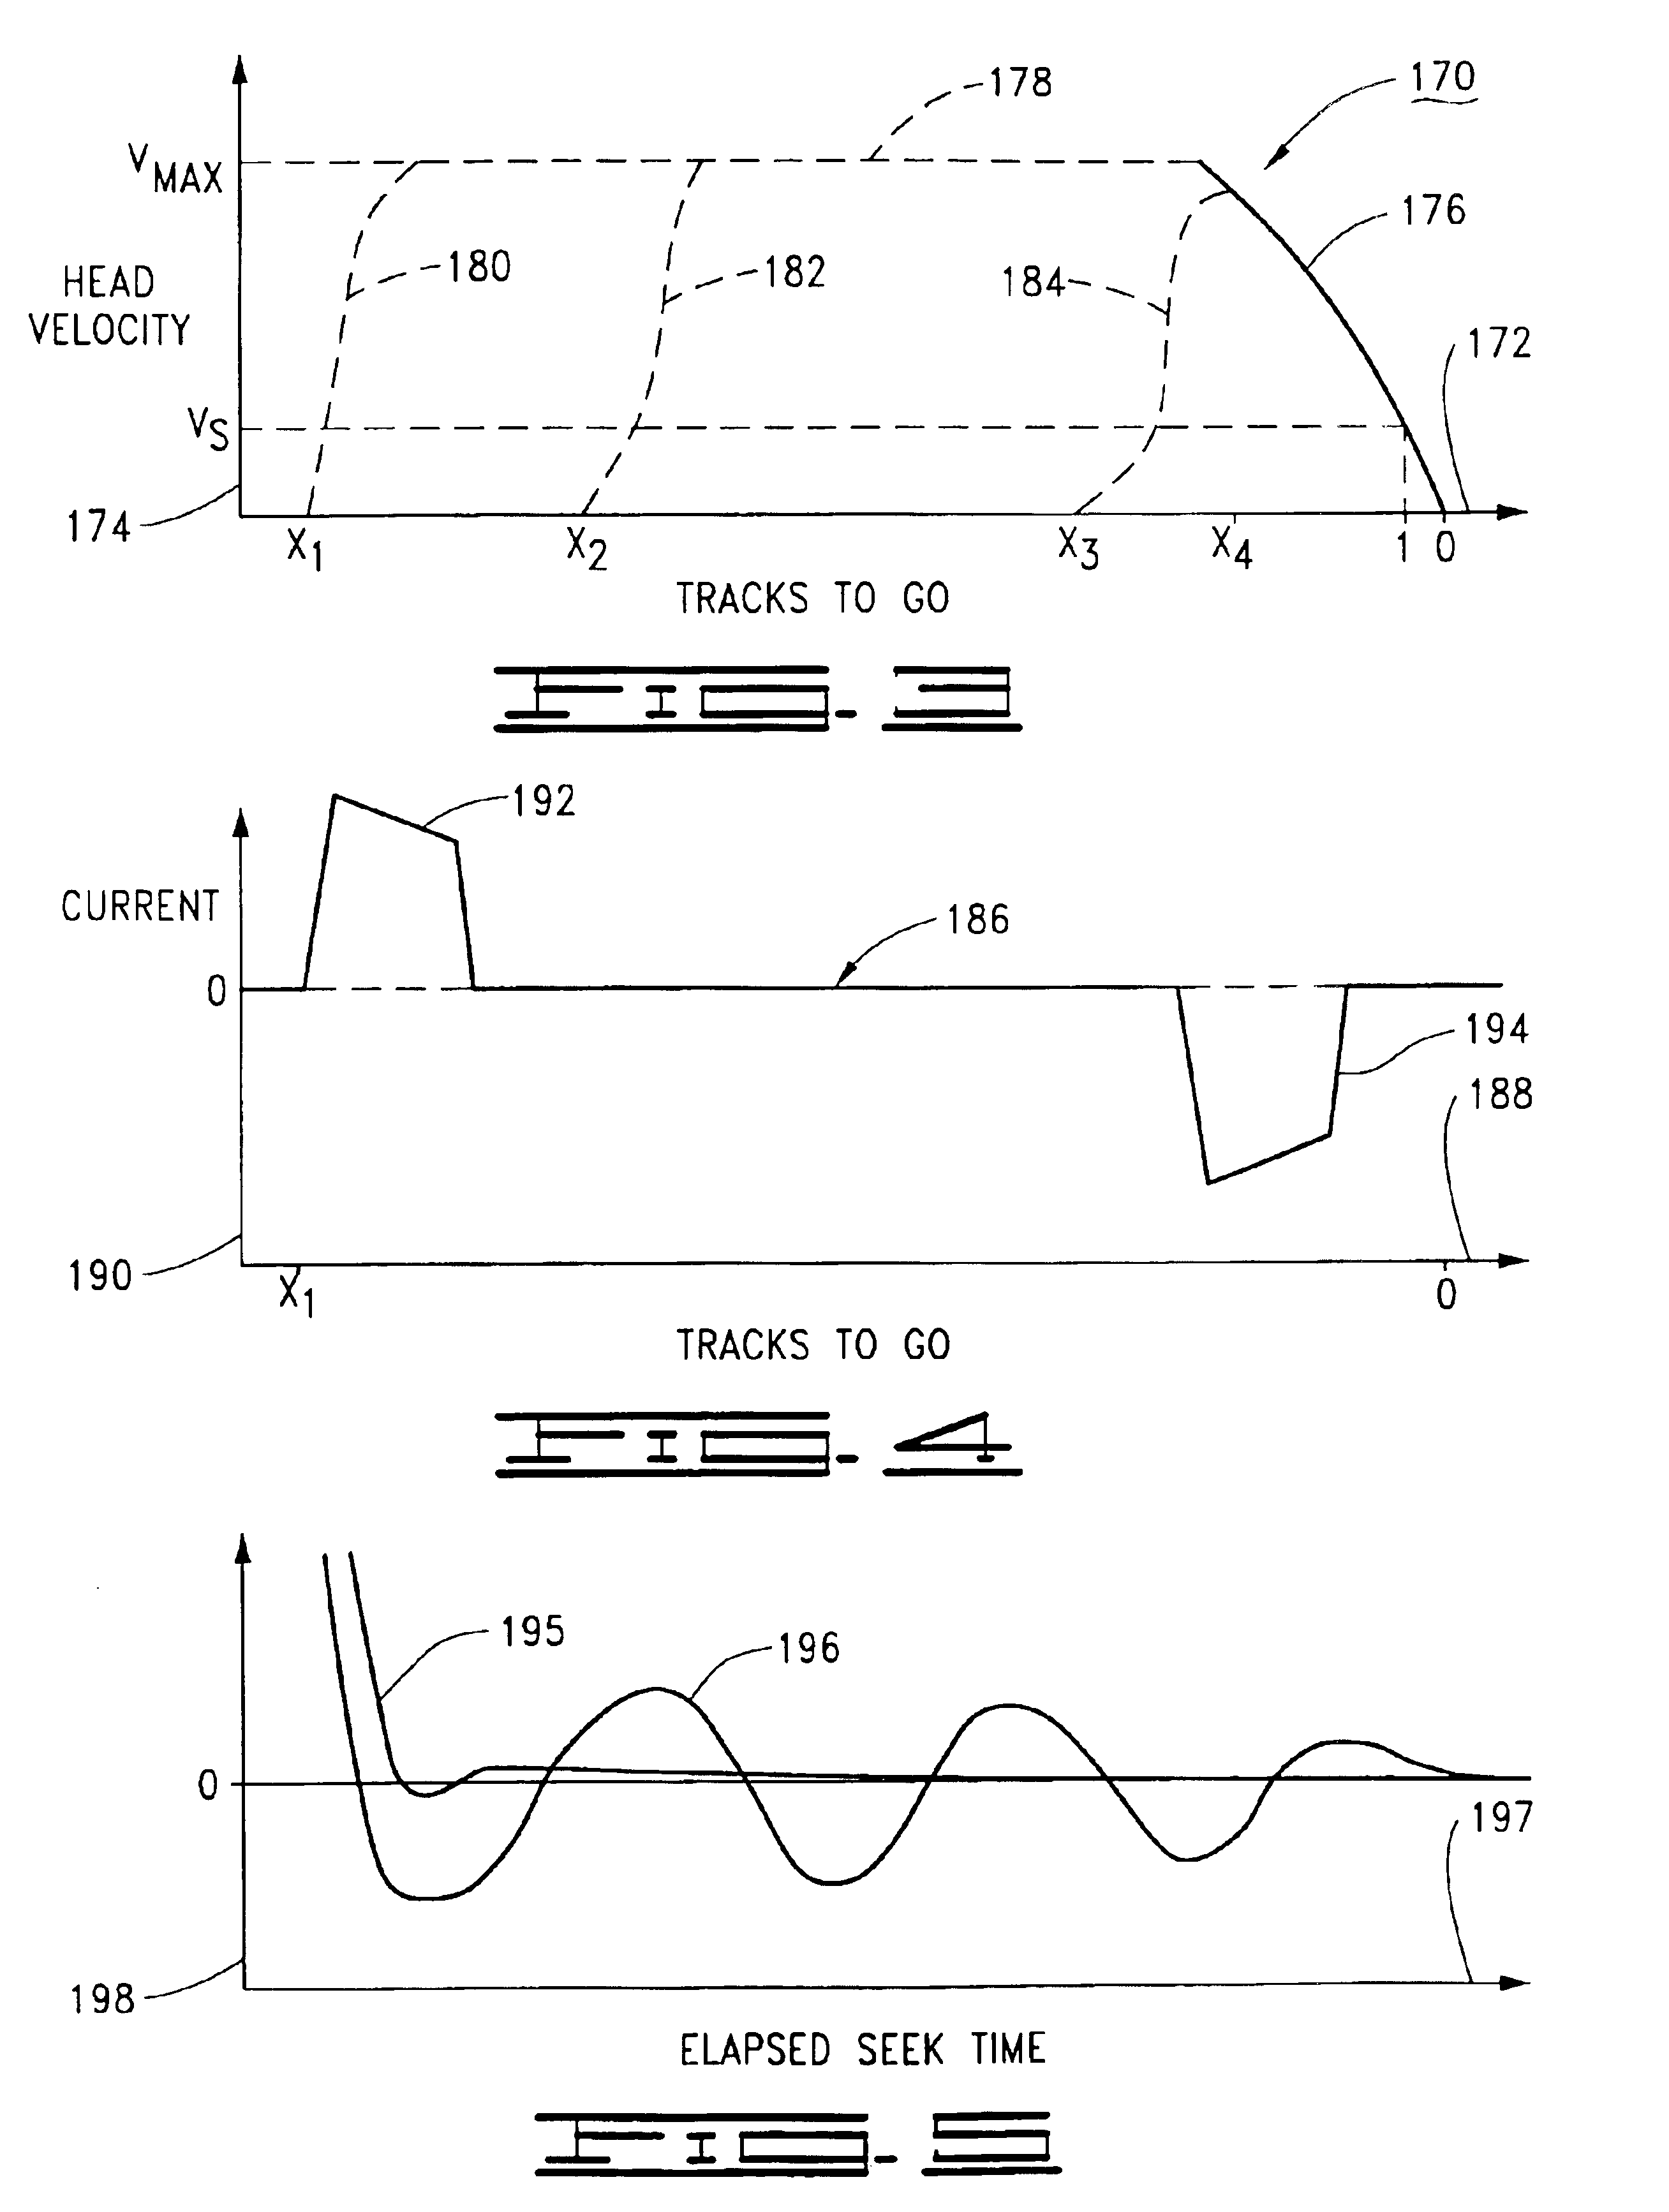 Reducing actuator arm oscillation during settle mode in a disc drive servo system